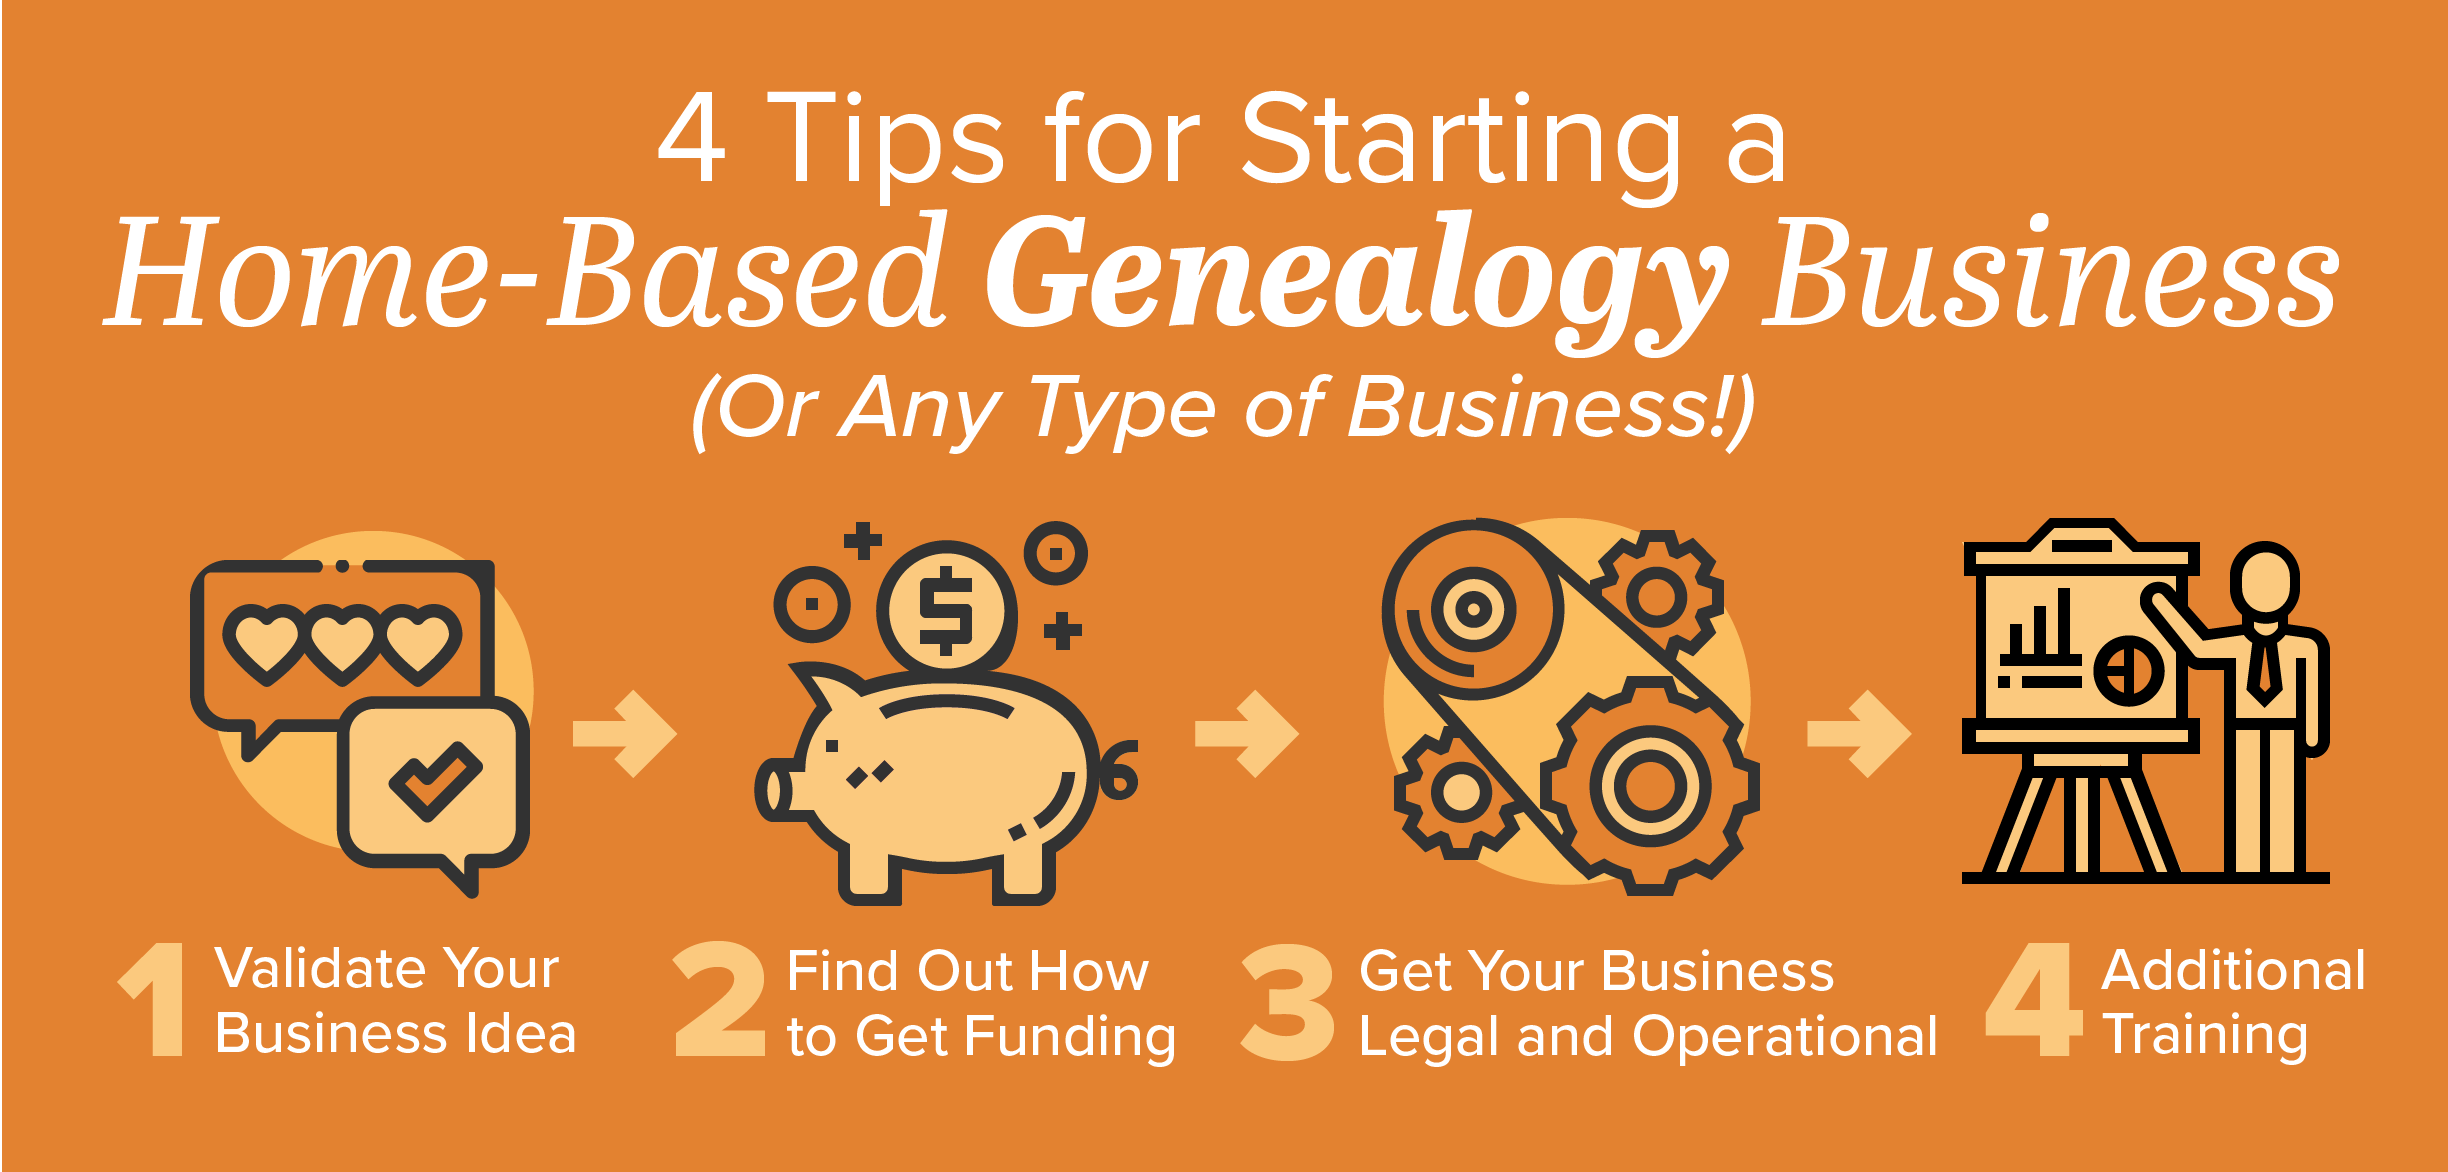 Genealogist Jobs - Certifications for Genealogy, Pay, Career Resources